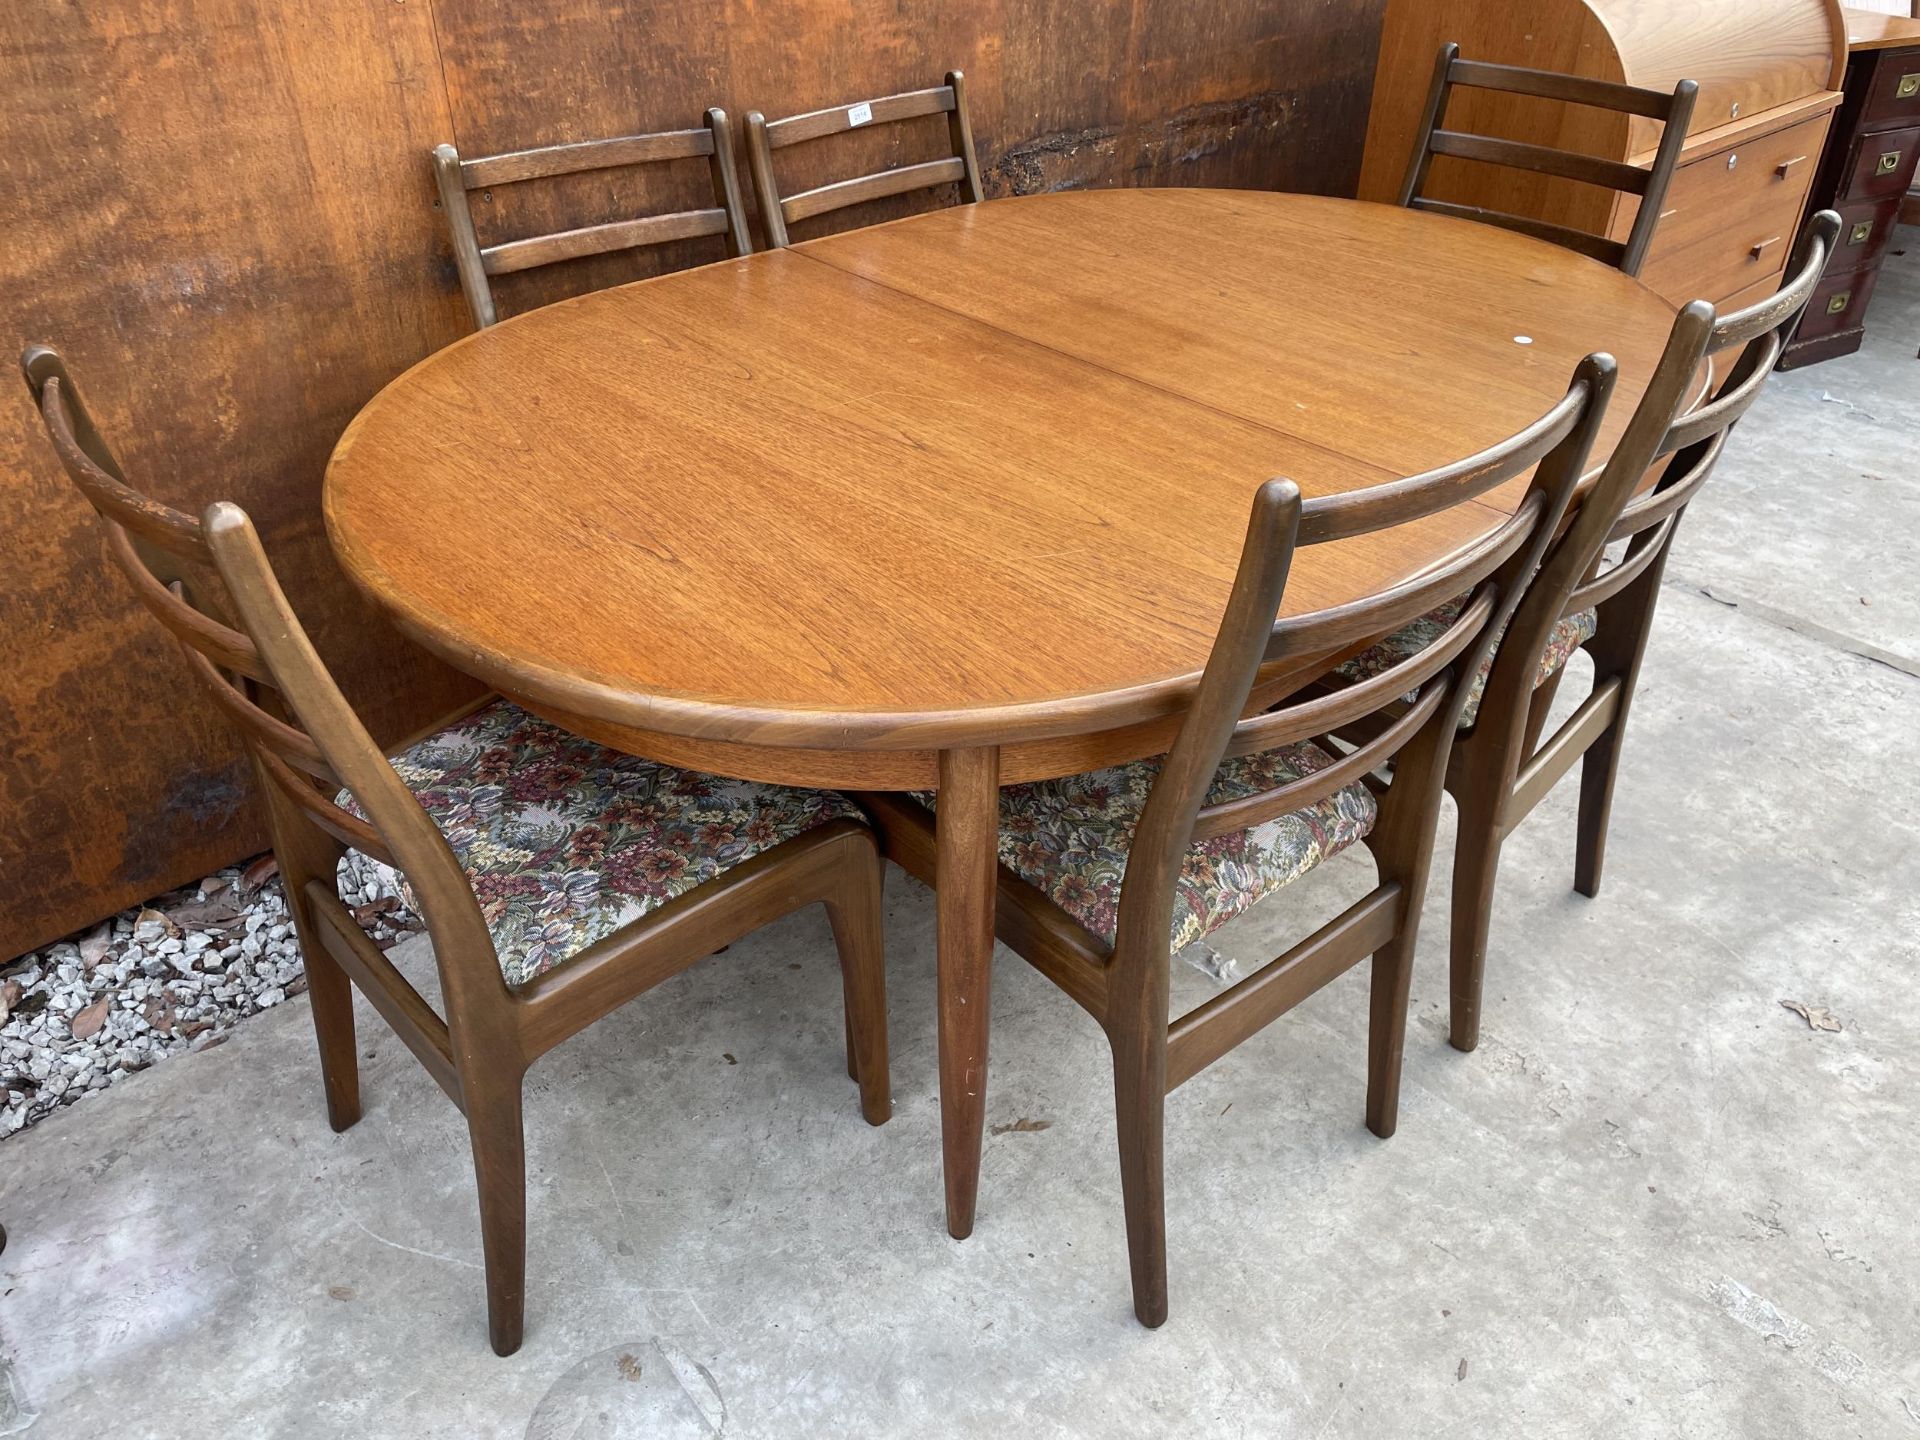 A G-PLAN RETRO TEAK EXTENDING DINING TABLE, 64 X 44" (LEAF 18") AND SIX LADDERBACK DINING CHAIRS - Image 2 of 7